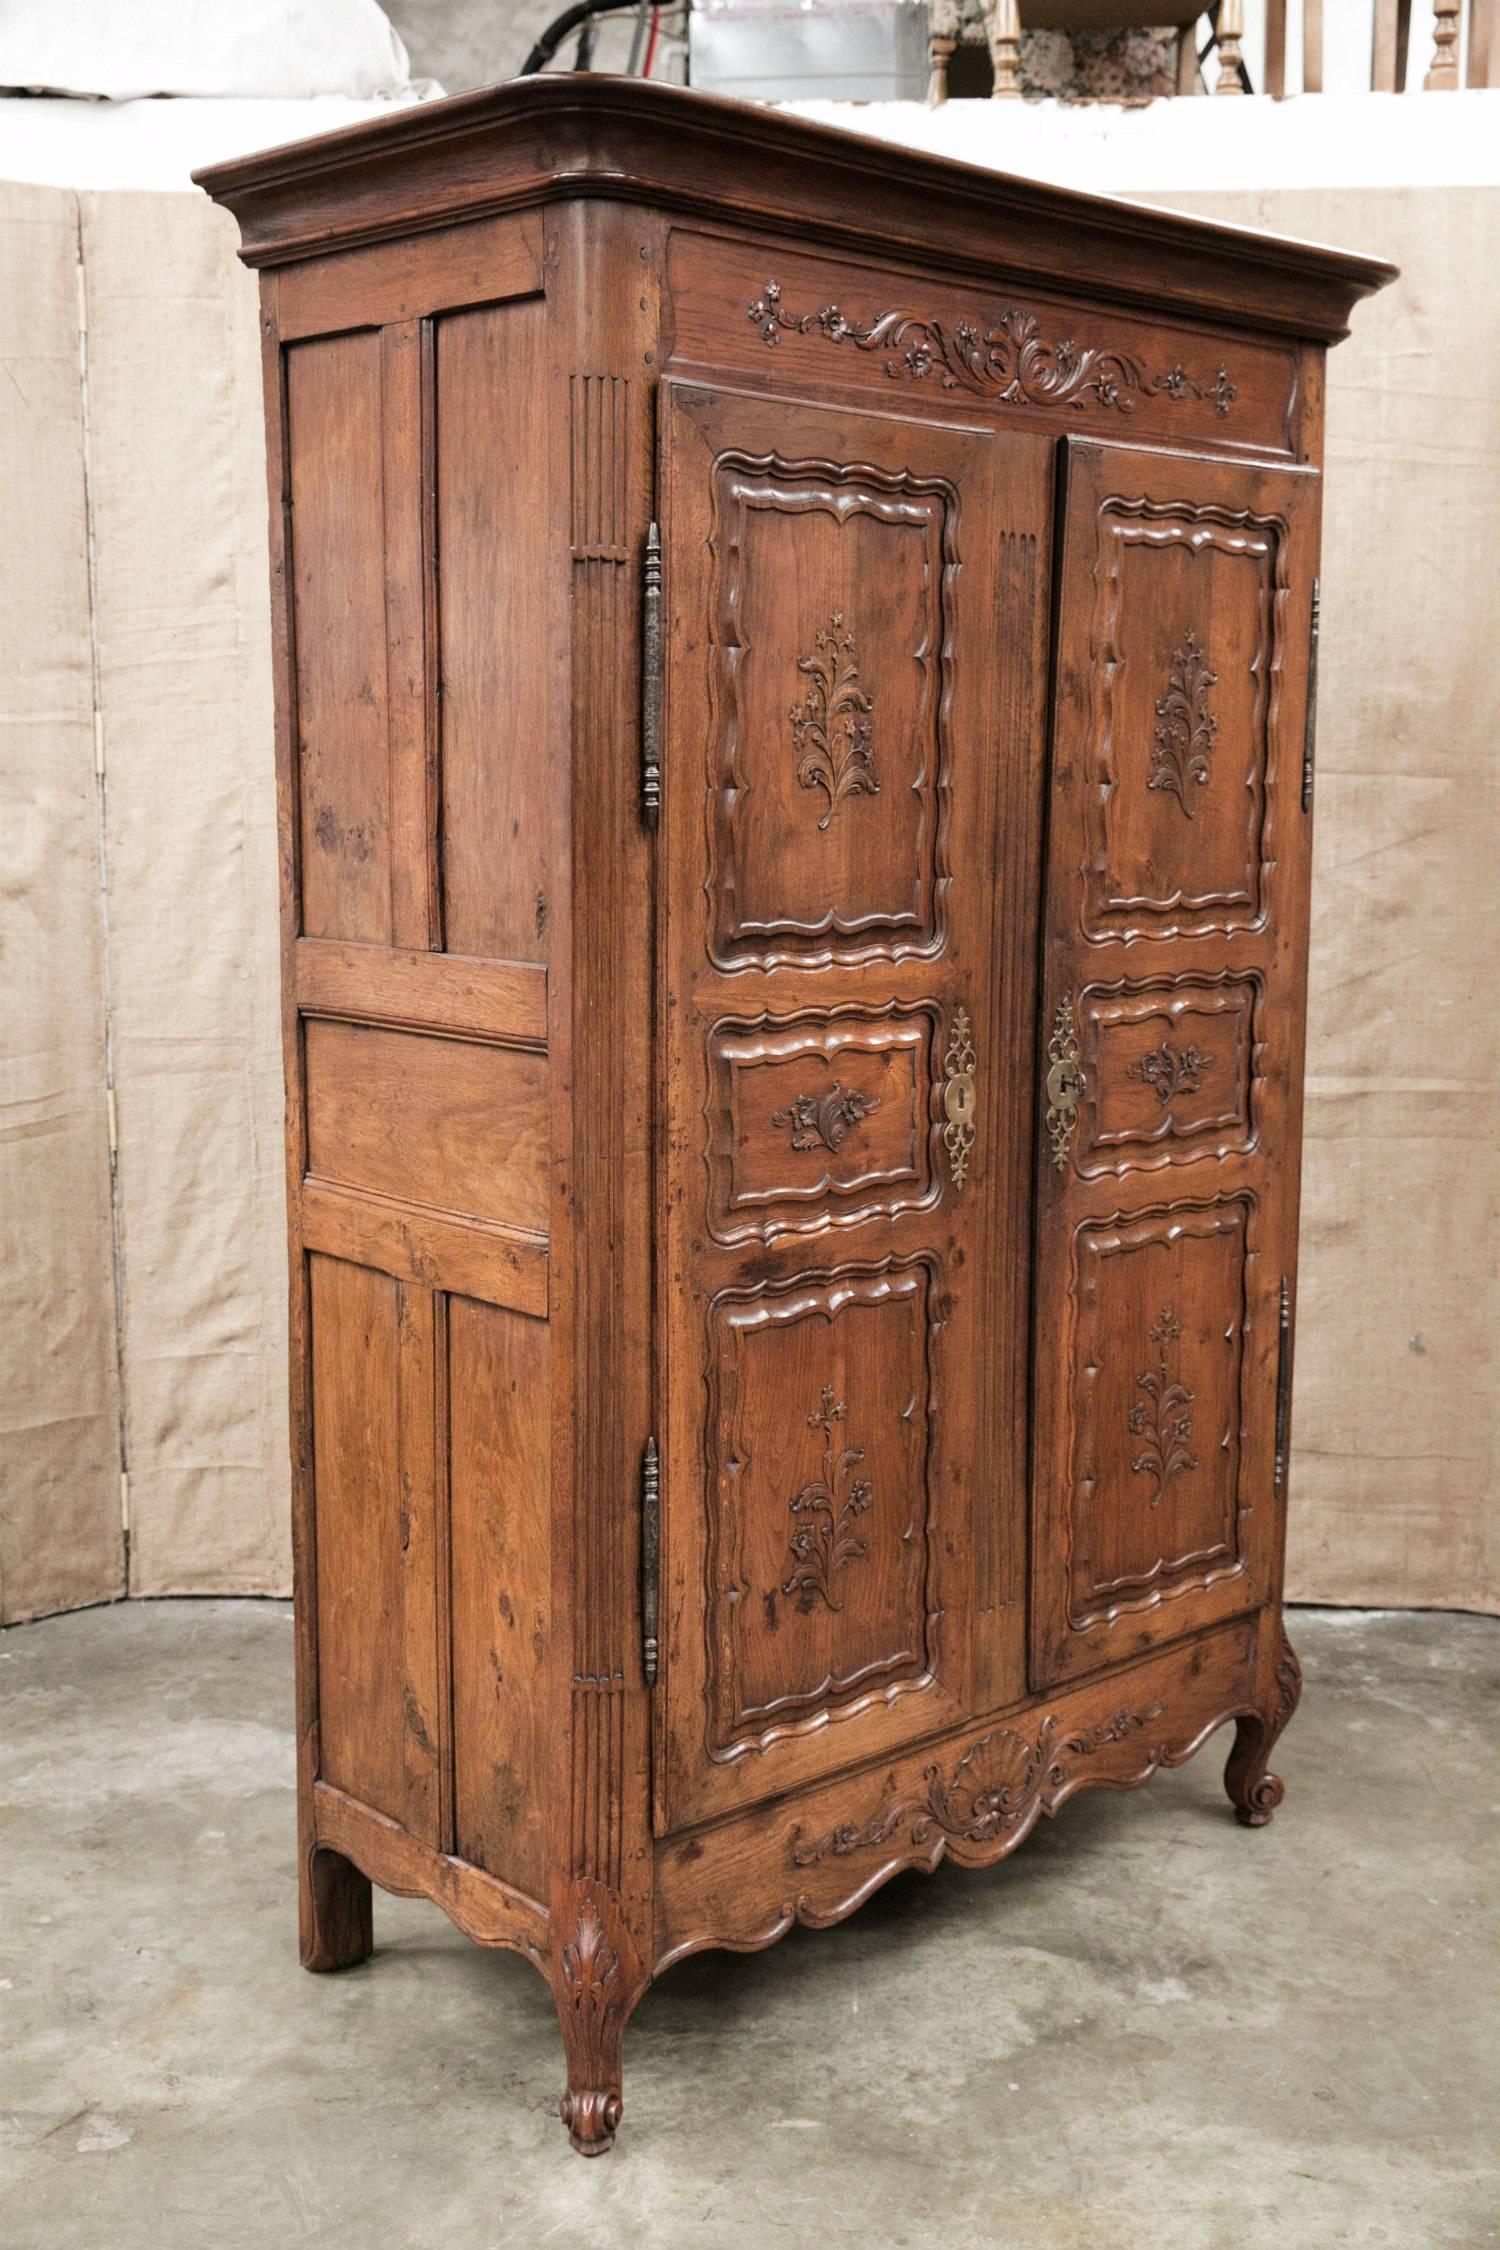 Intricately carved early 19th century Country French Louis XV style armoire handcrafted by skilled artisans in the Breton region of France from old growth oak. The cornice sits atop a carved frieze featuring motifs such as flowers, leaves and